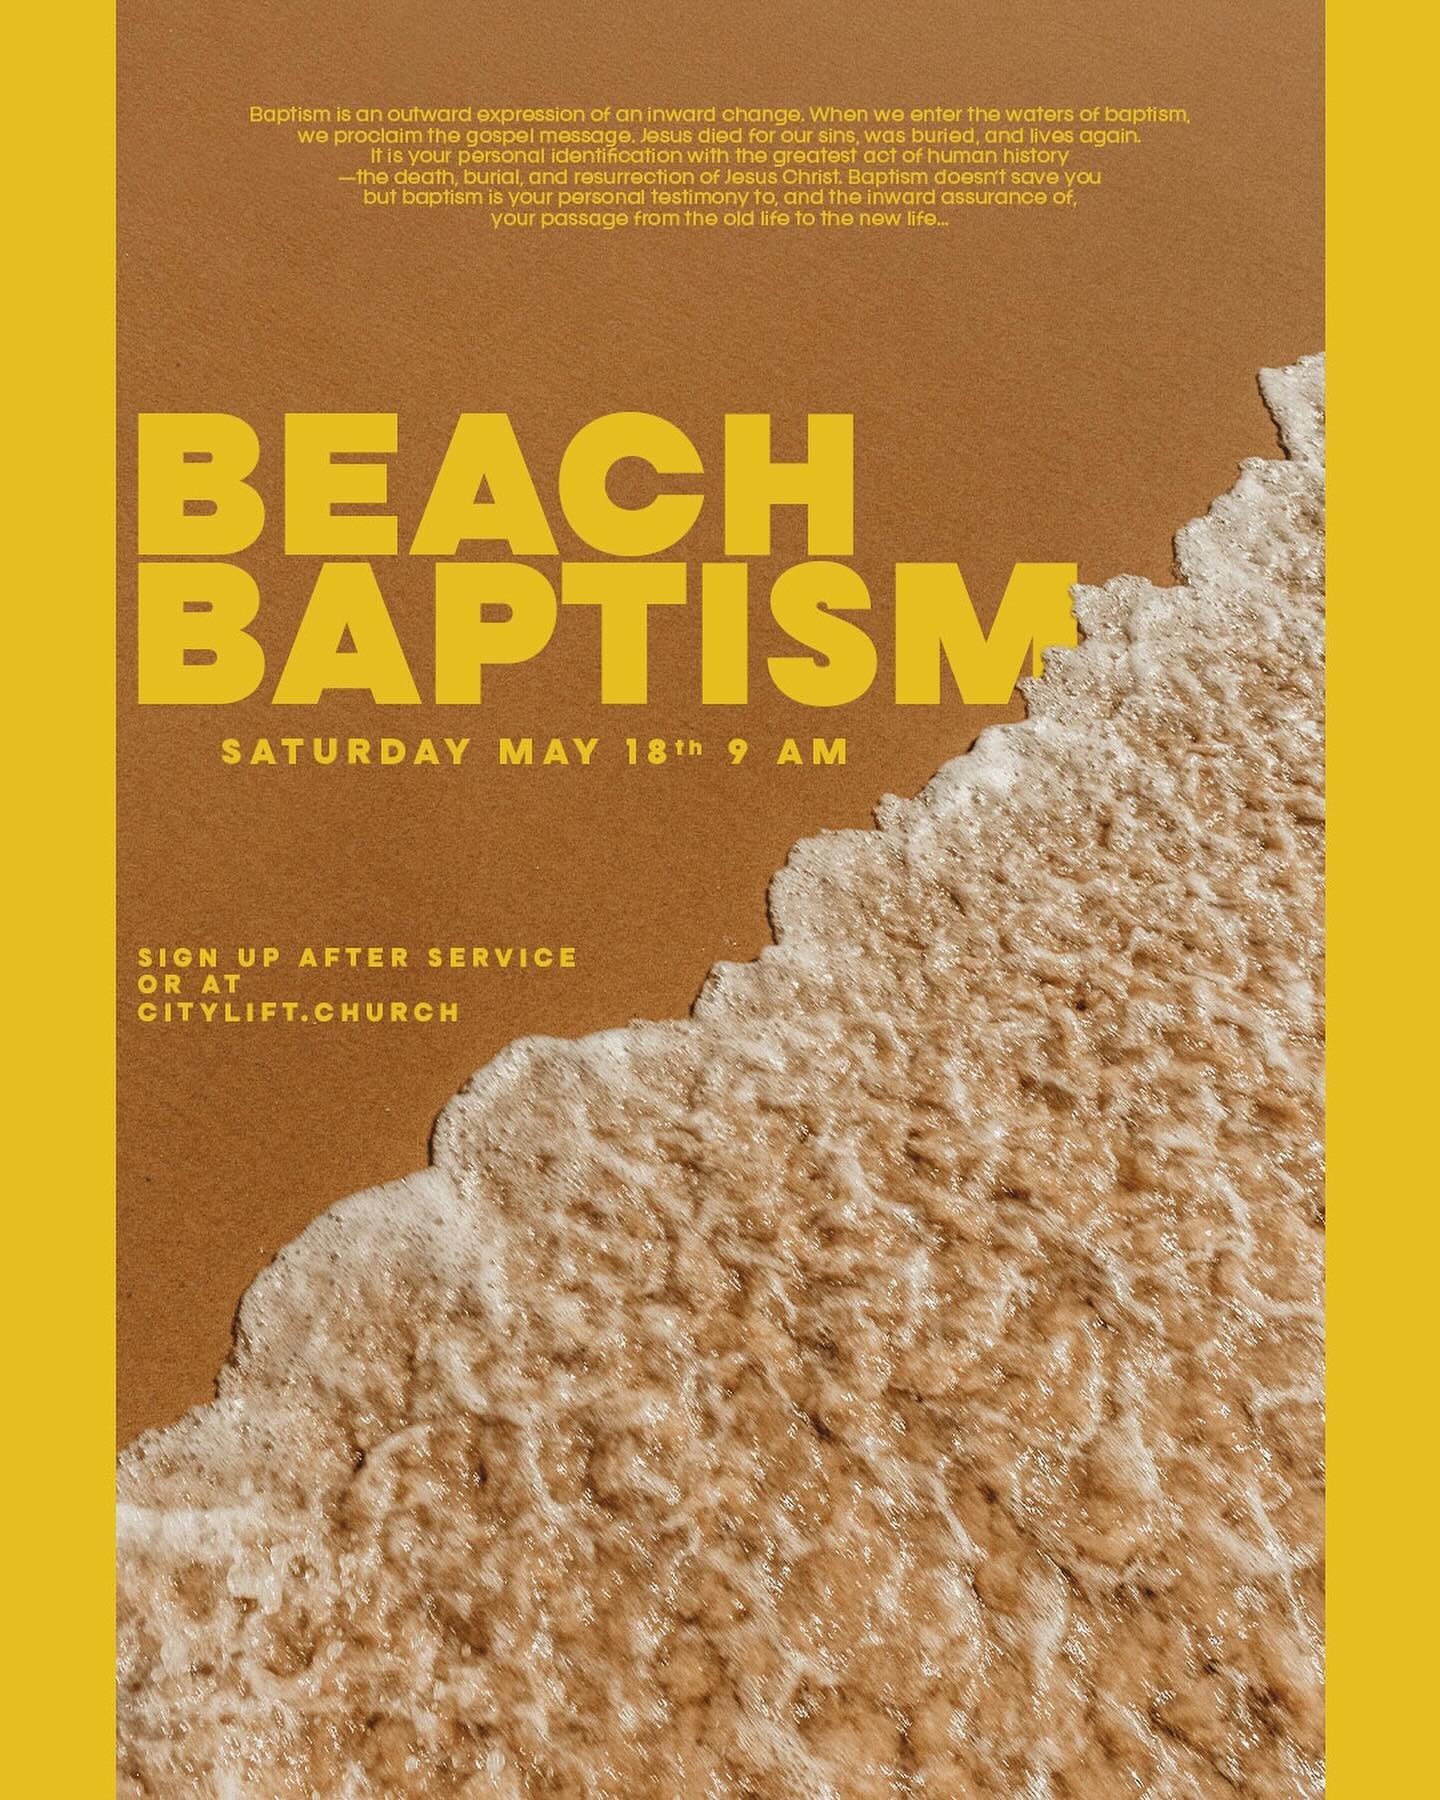 Beach Baptism is happening this Saturday! To sign up head on over to our website www.citylift.church/baptism